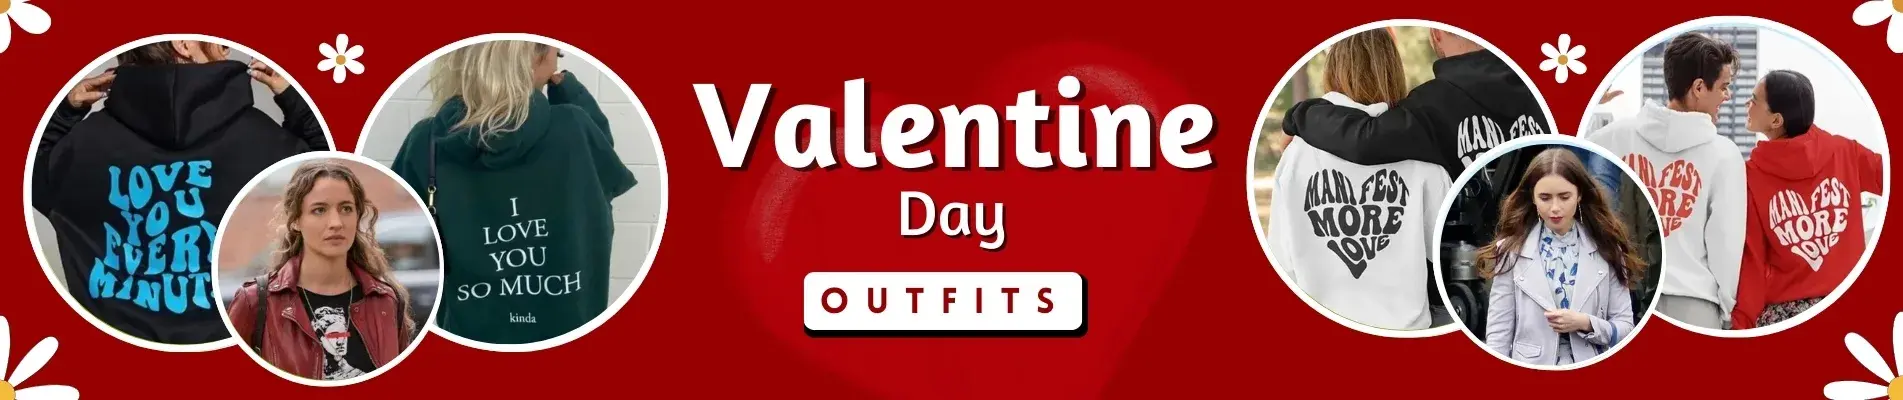 Valentine Day Outfits Collection